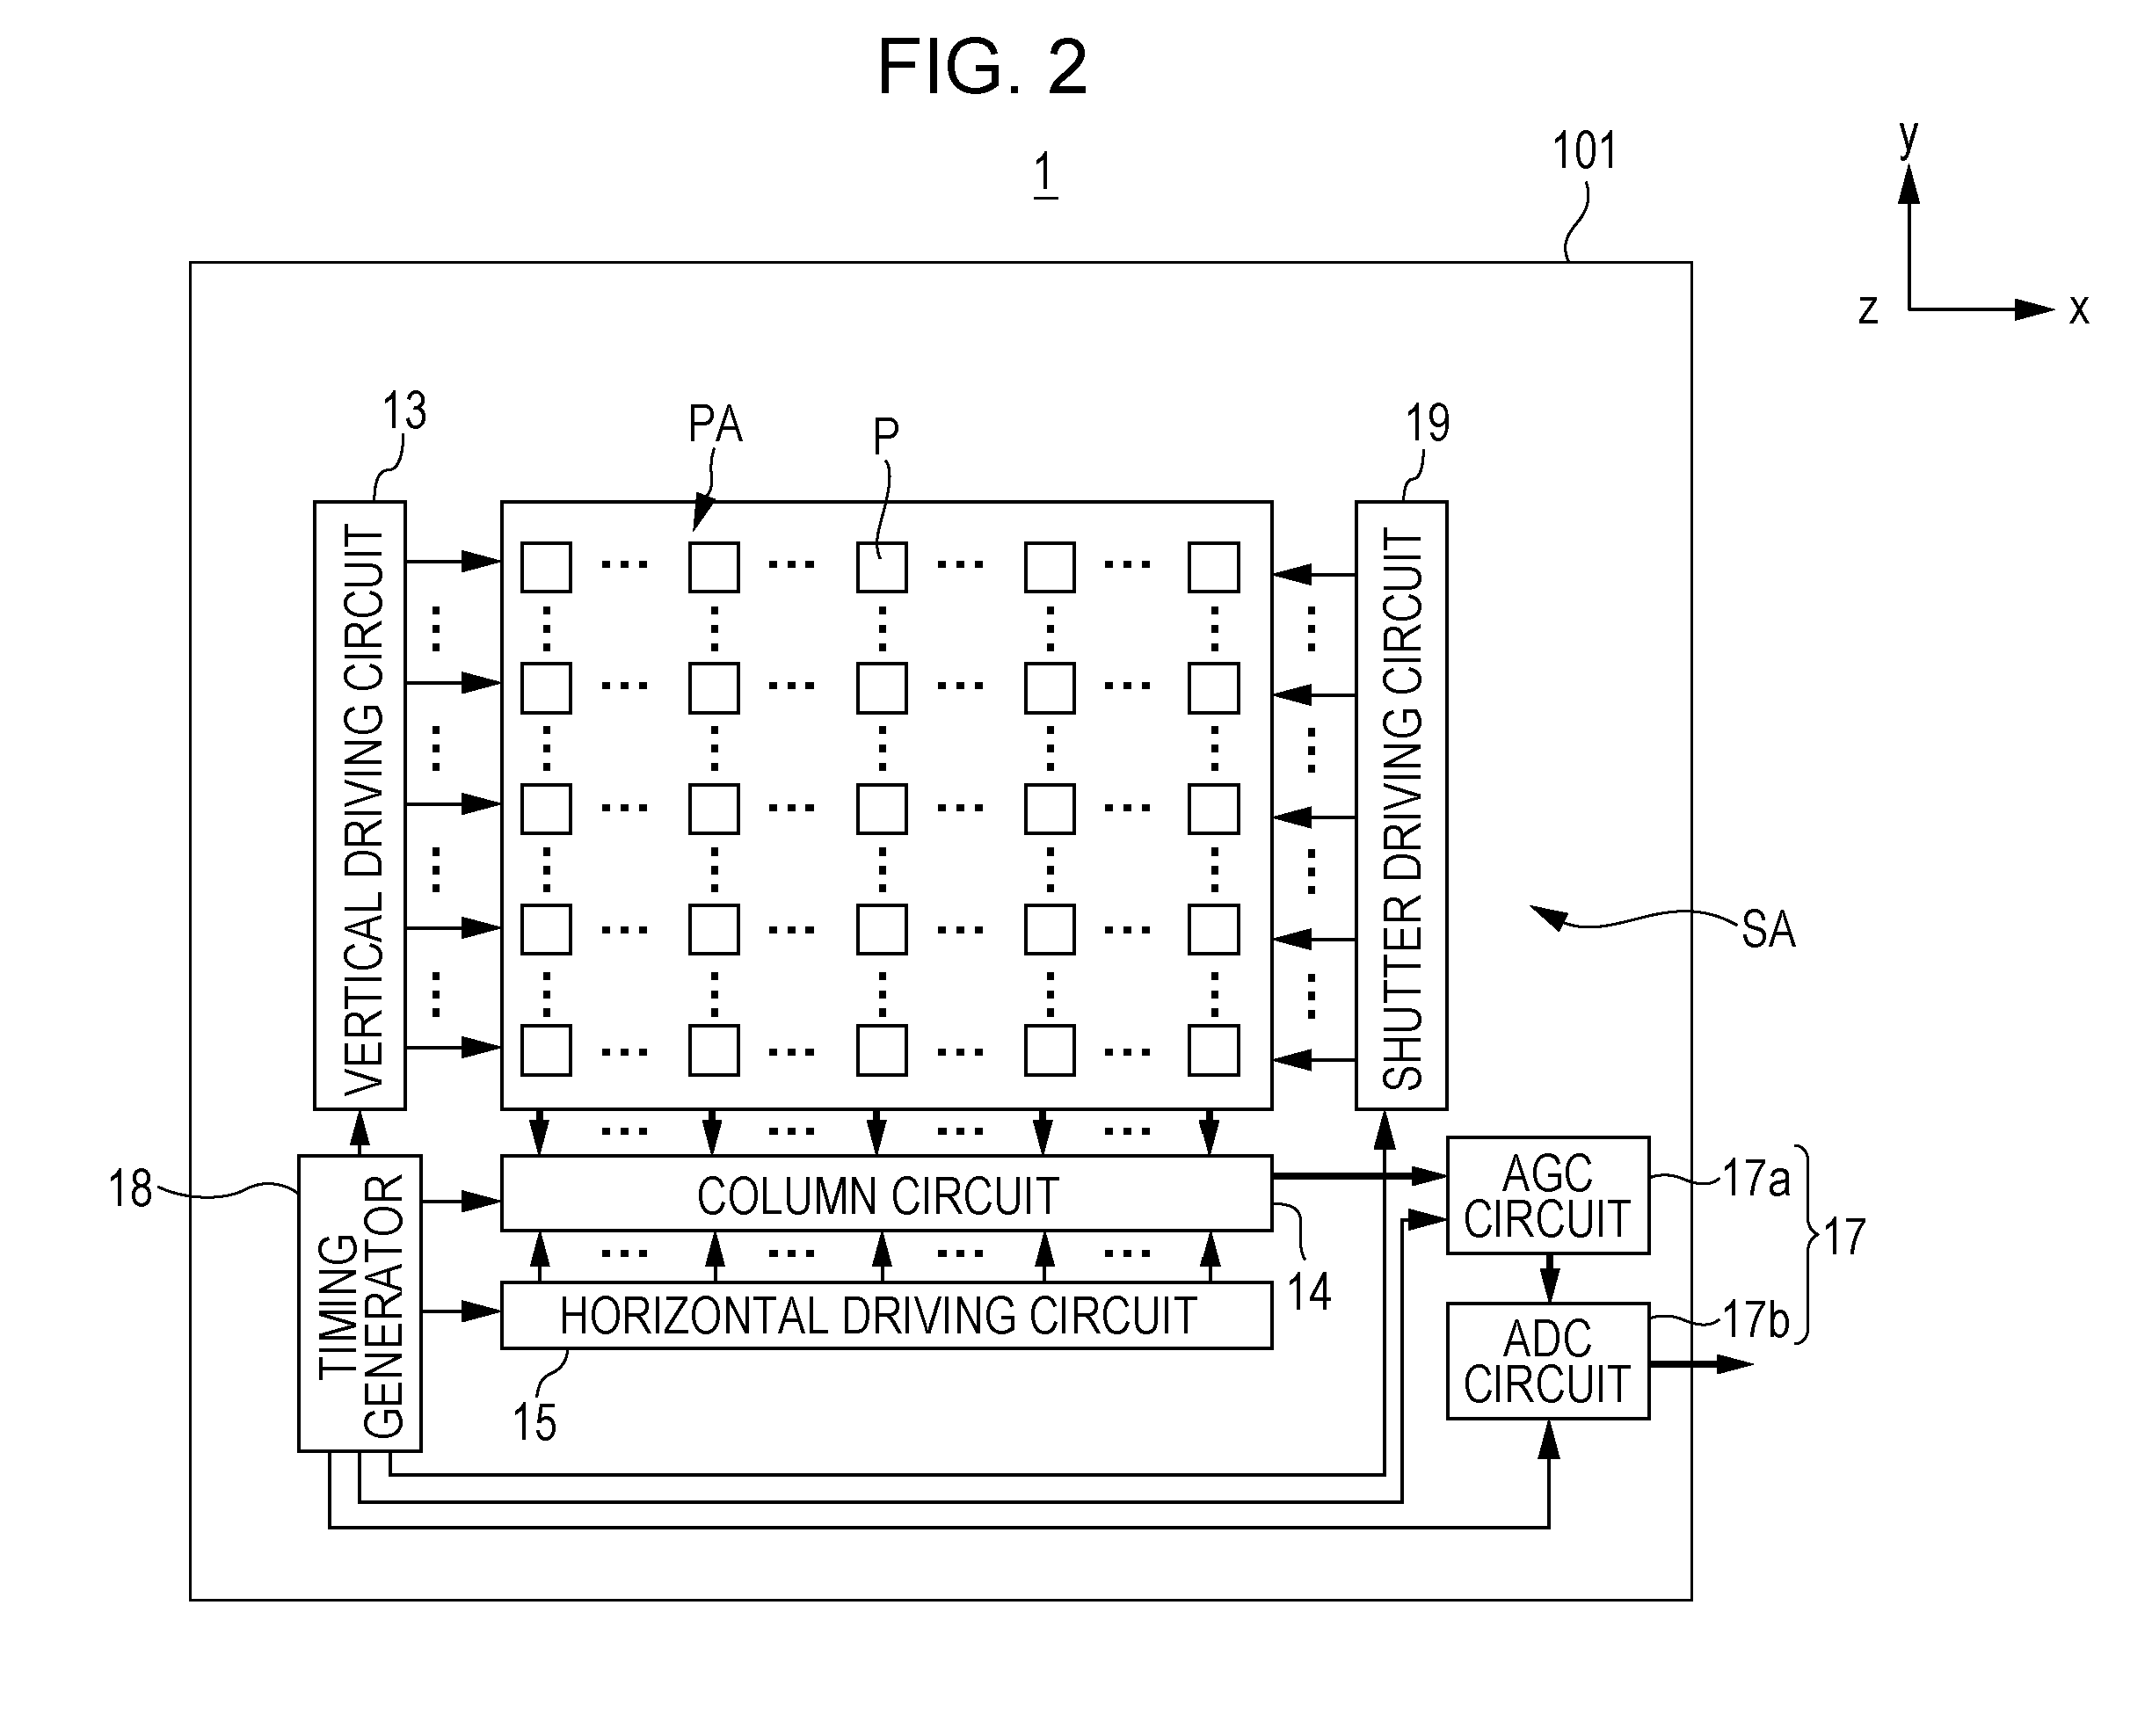 Solid-state imaging device, method of manufacturing thereof, and electronic apparatus